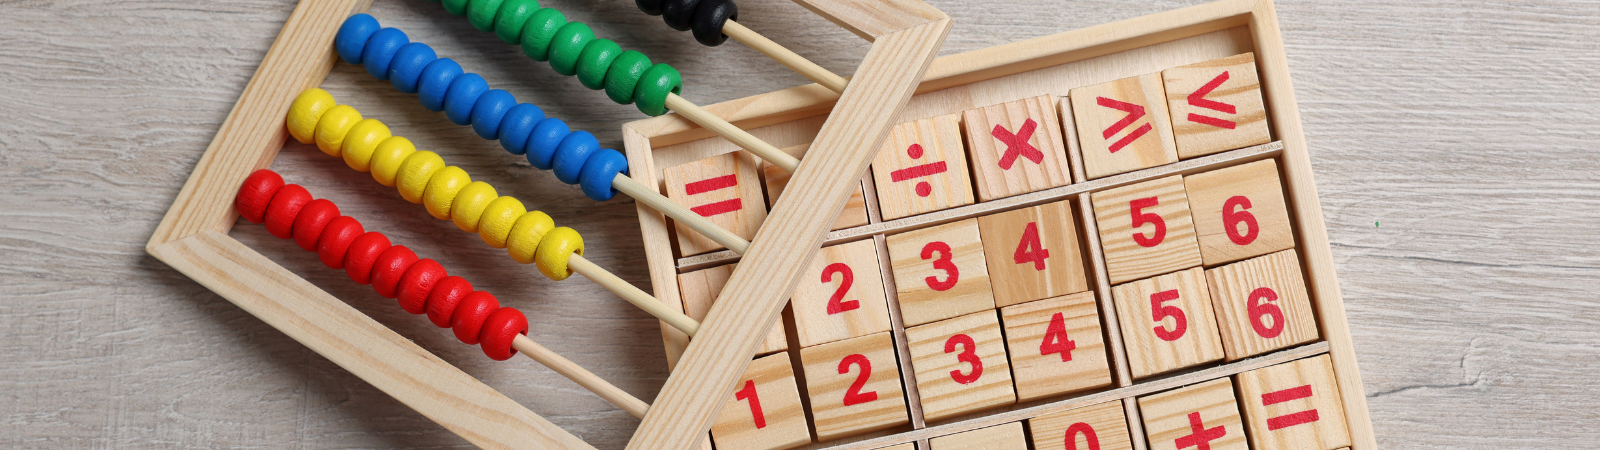 An Abacus and block numbers and math symbols